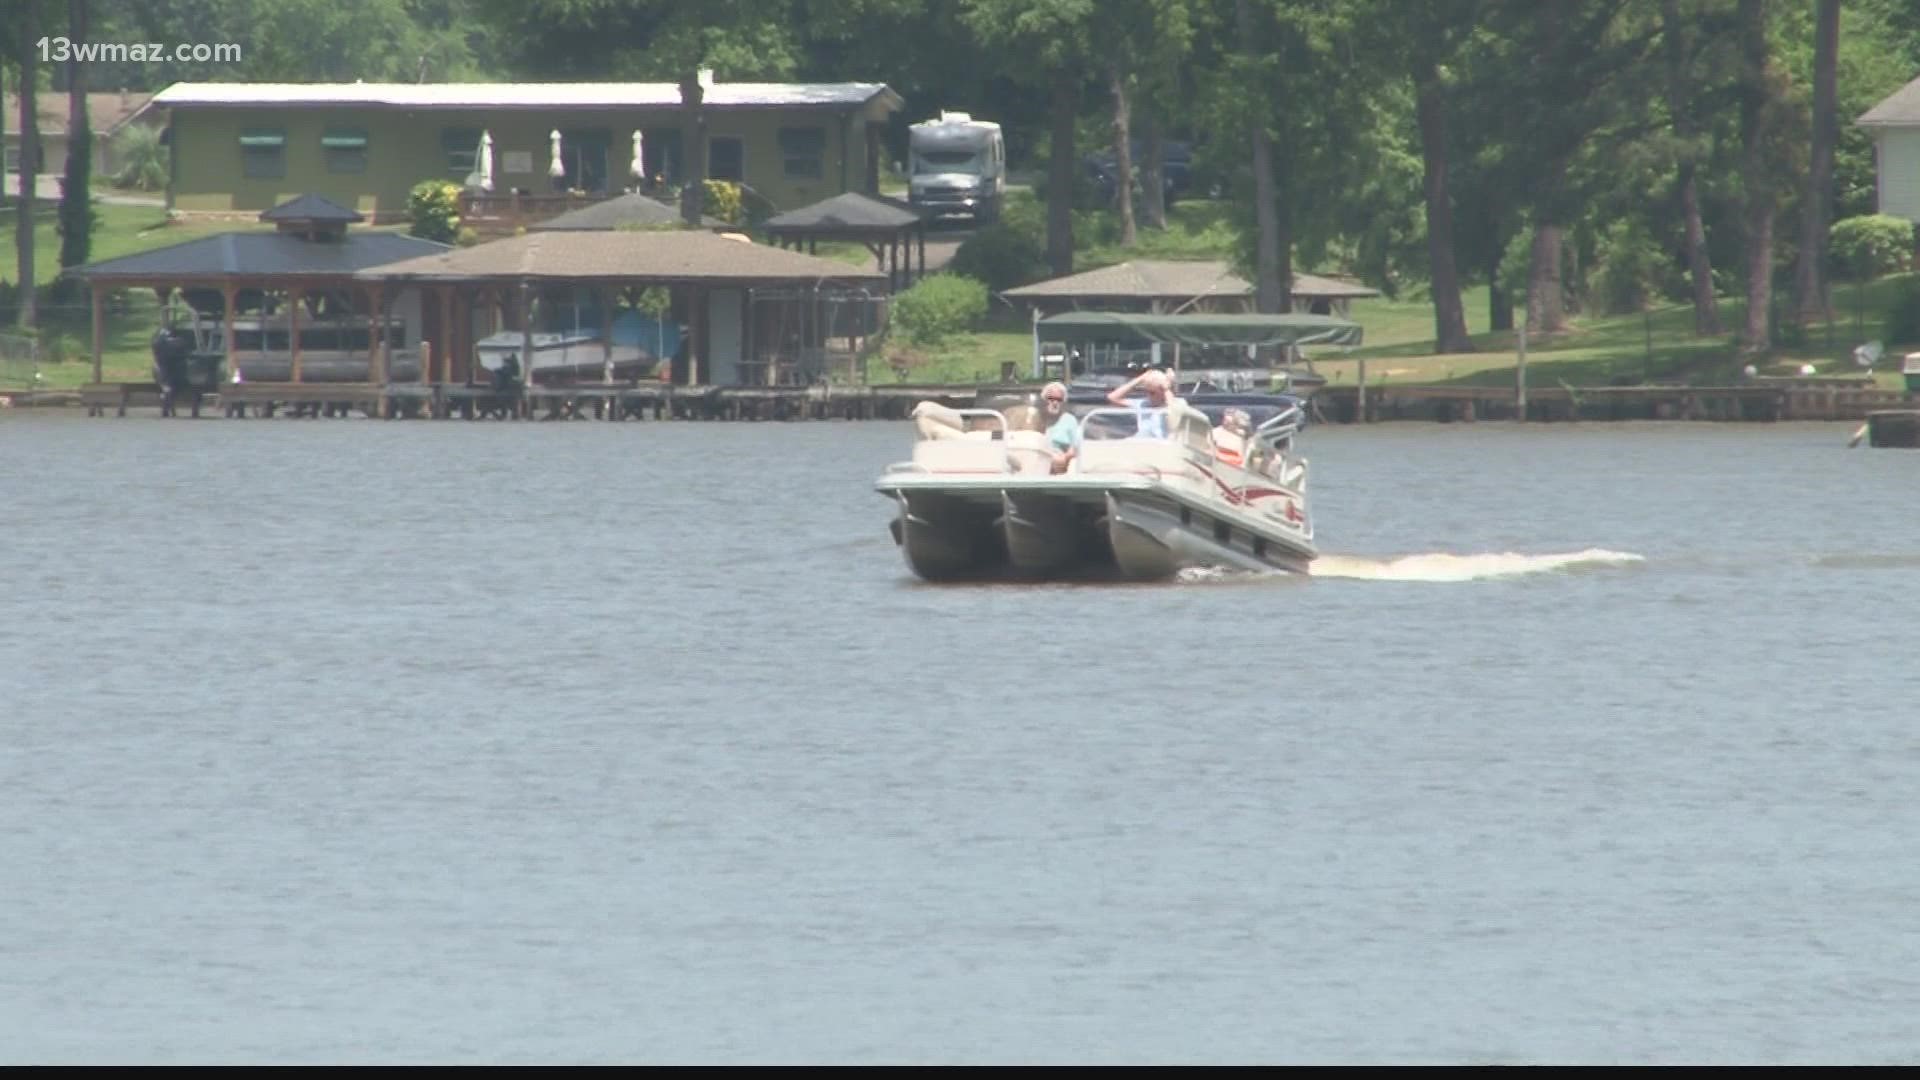 It's the fifth death this year on Lake Sinclair and with warmer weather approaching, there will be a lot to watch out for.